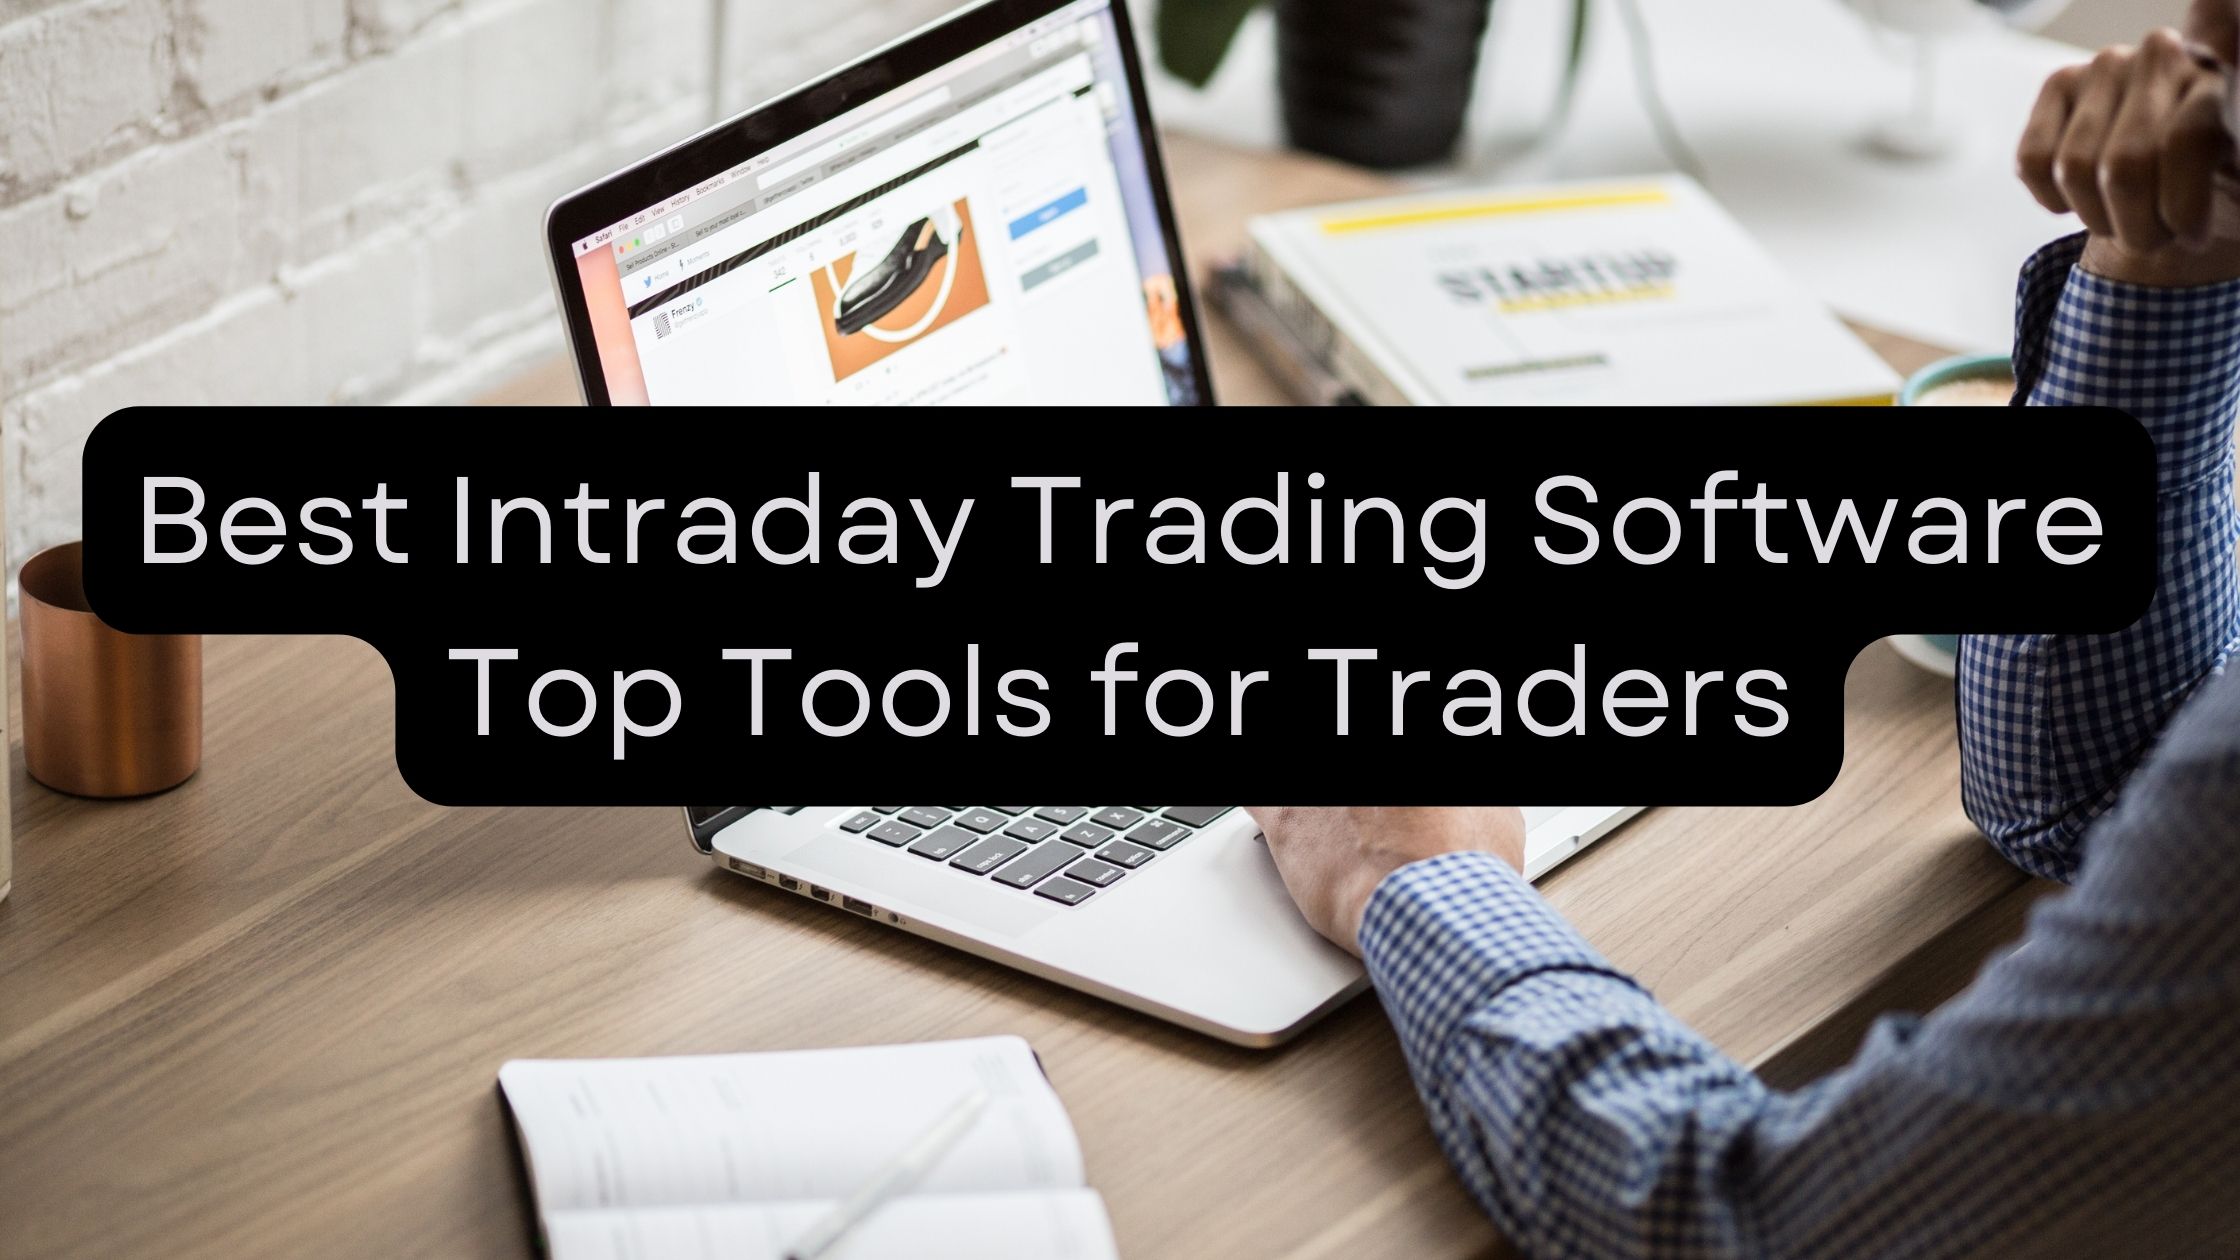 Best Intraday Trading Software: Top Tools For Traders